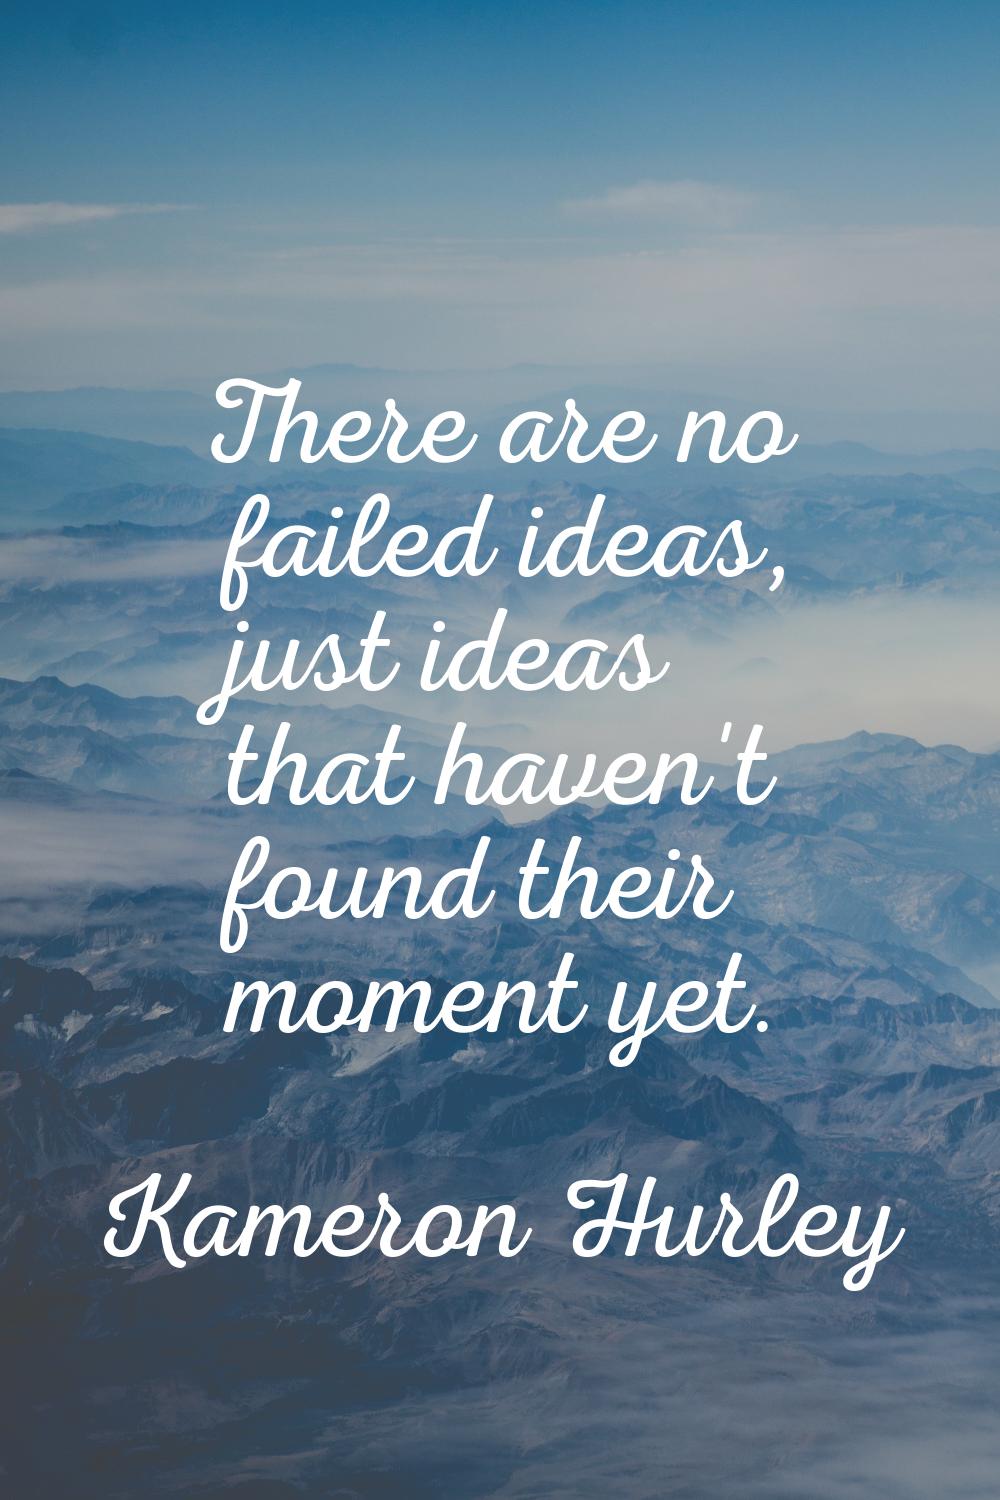 There are no failed ideas, just ideas that haven't found their moment yet.